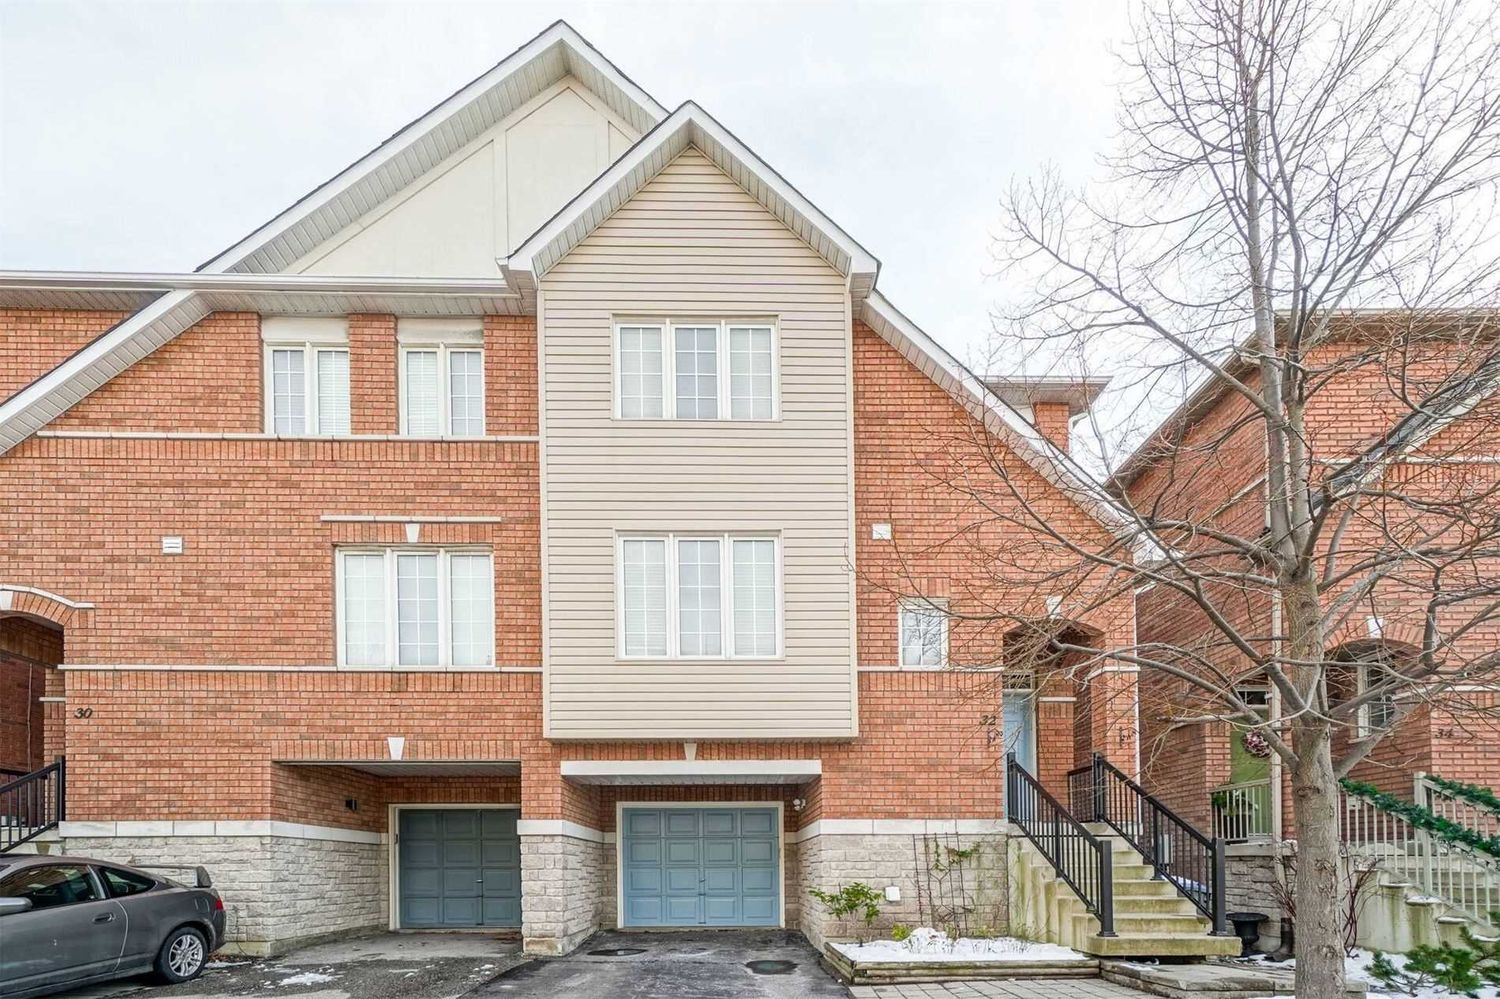 7155 Magistrate Terrace. 7155 Magistrate Terrace Townhomes is located in  Mississauga, Toronto - image #2 of 2